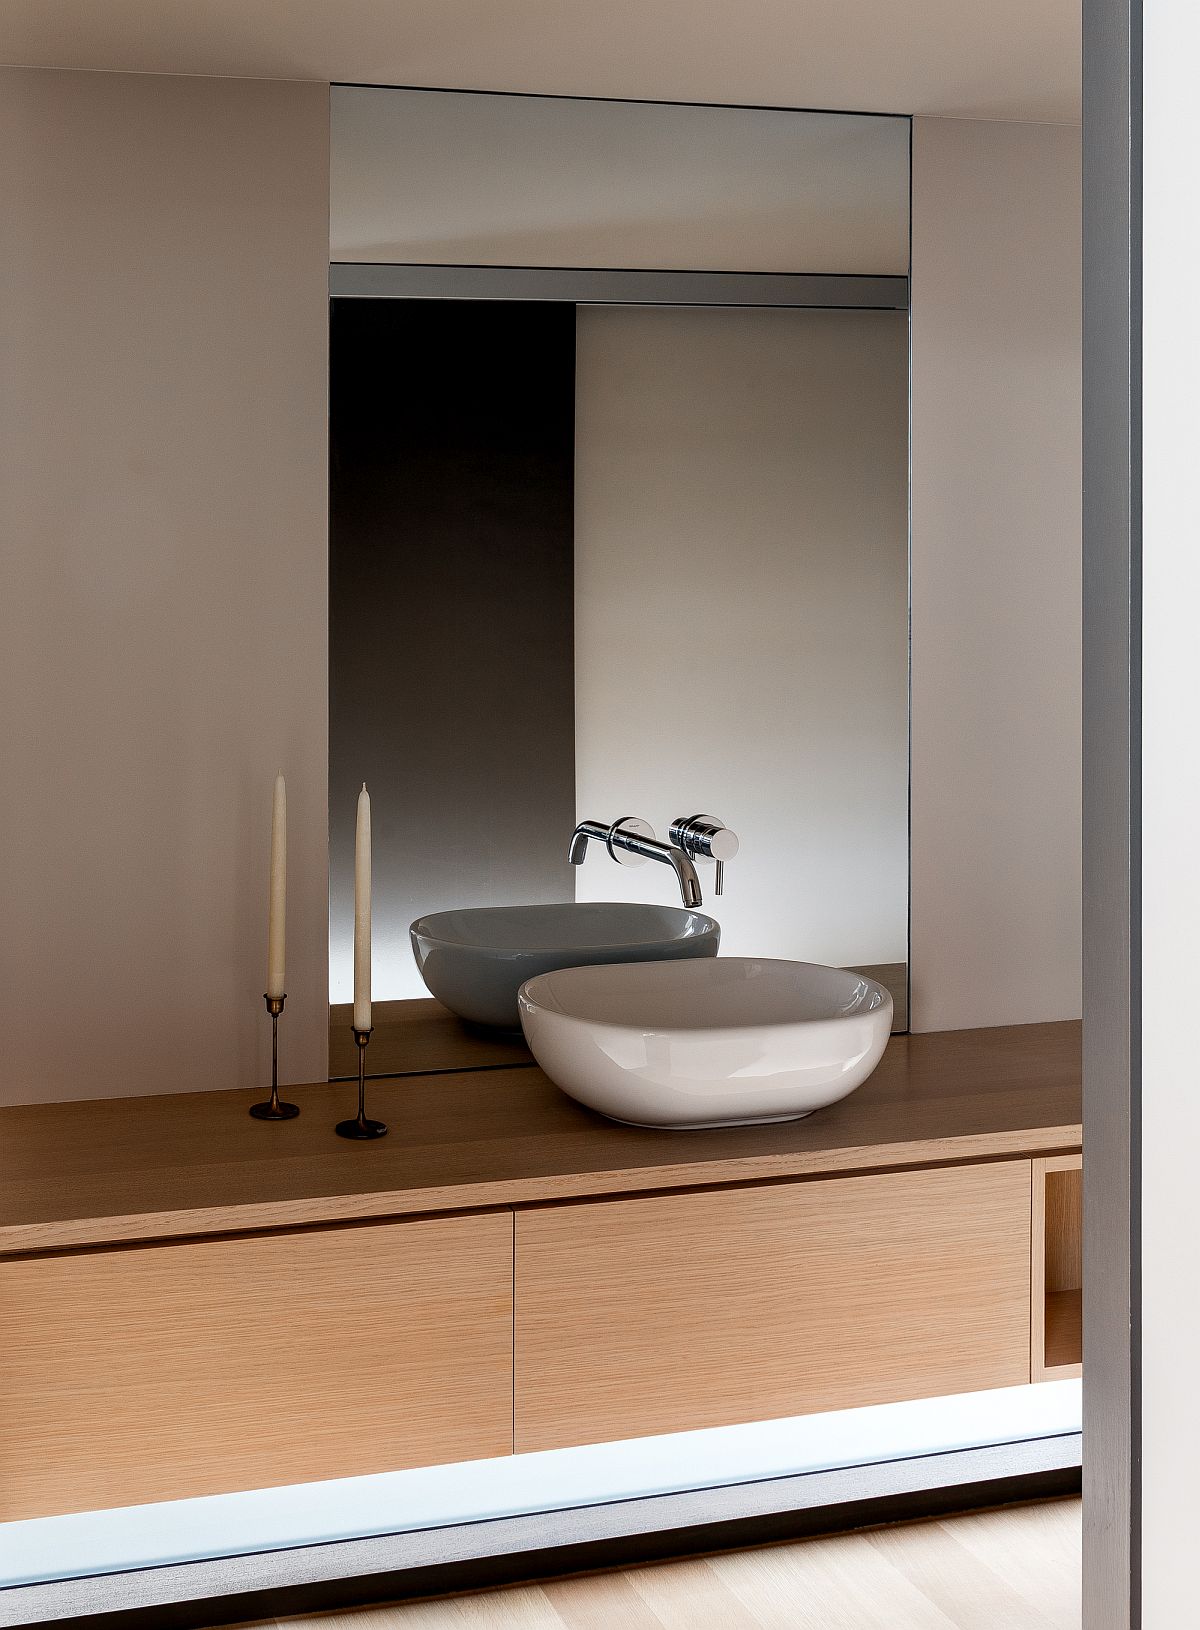 Contemporary bathroom with a sleek wooden vanity and a neutral color scheme